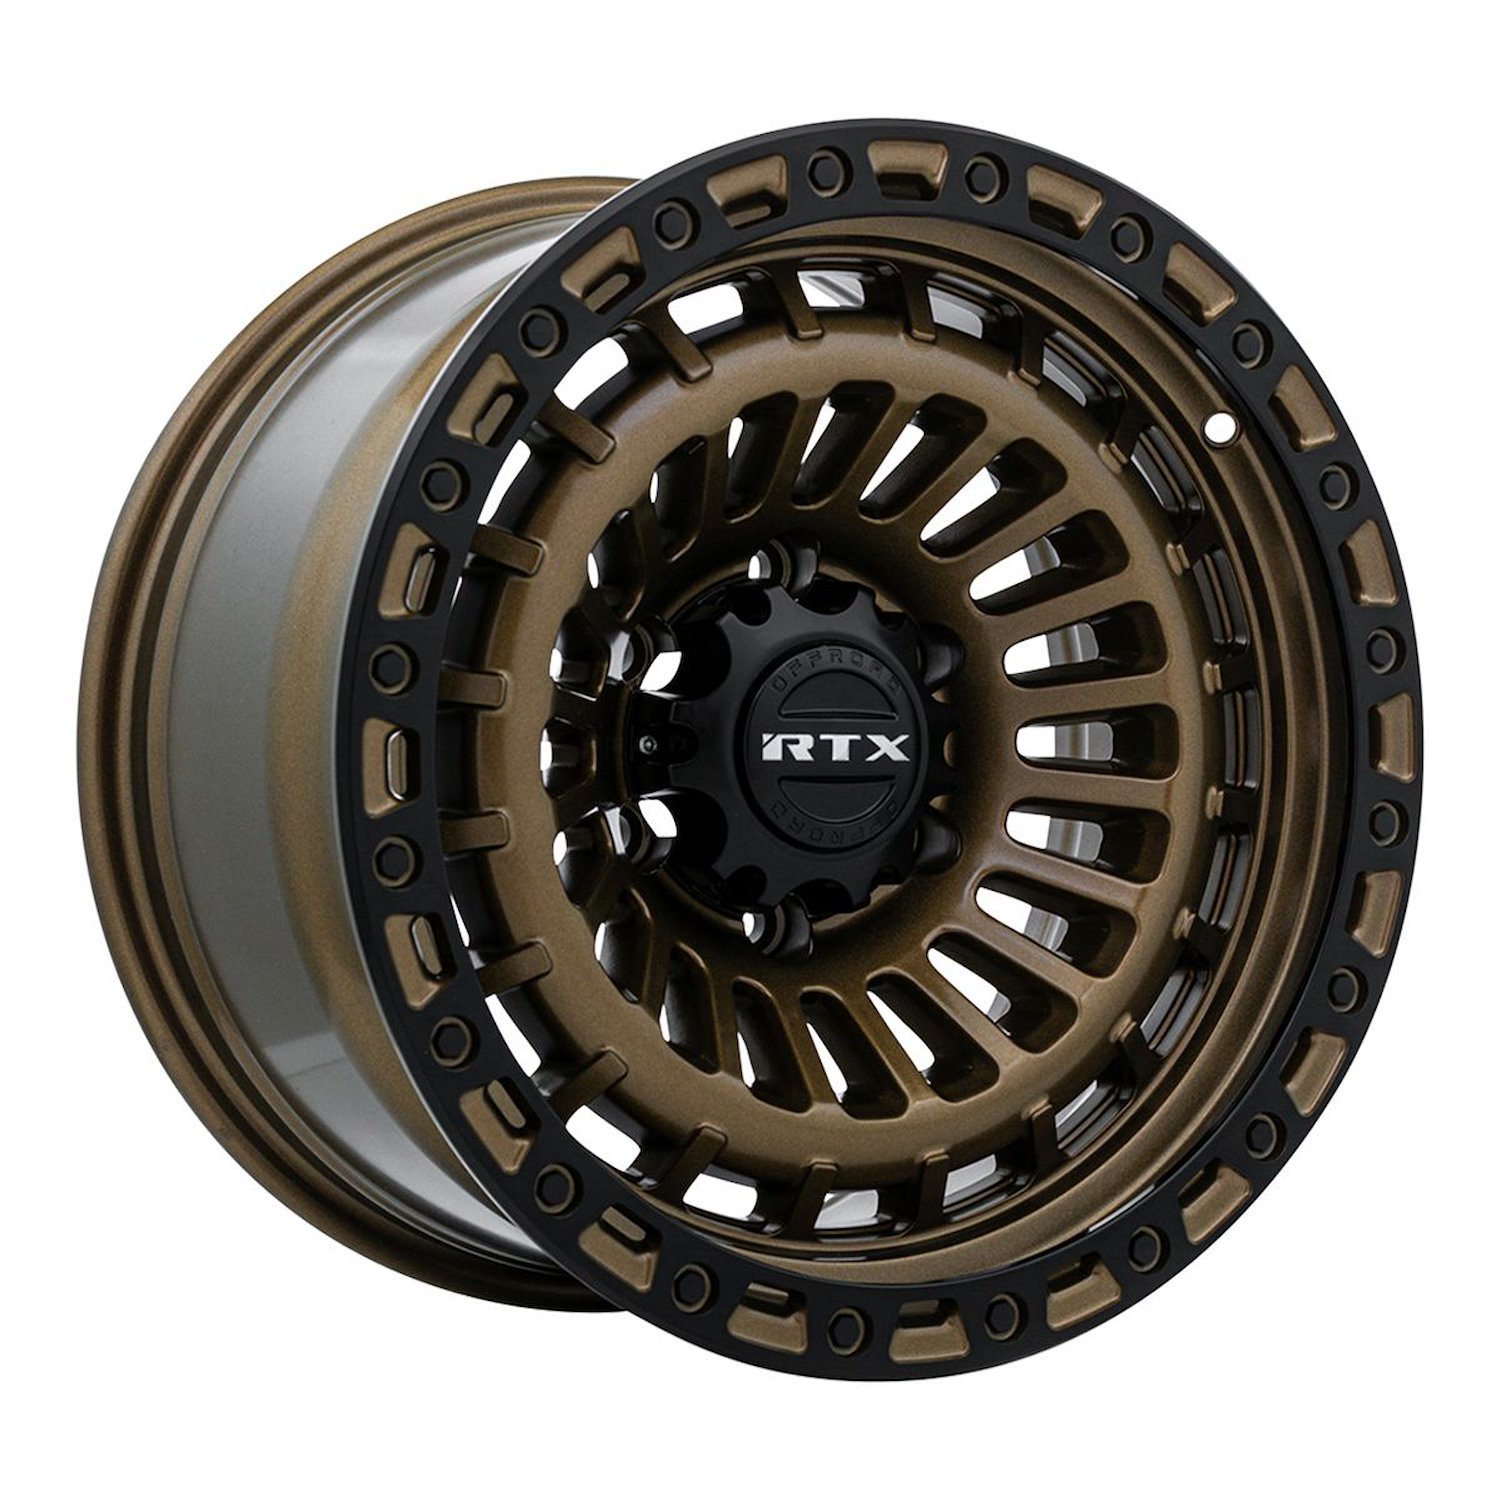 083099 Off-Road Series Moab Wheel [Size: 18" x 9"] Bronze with Satin Black Lip Finish